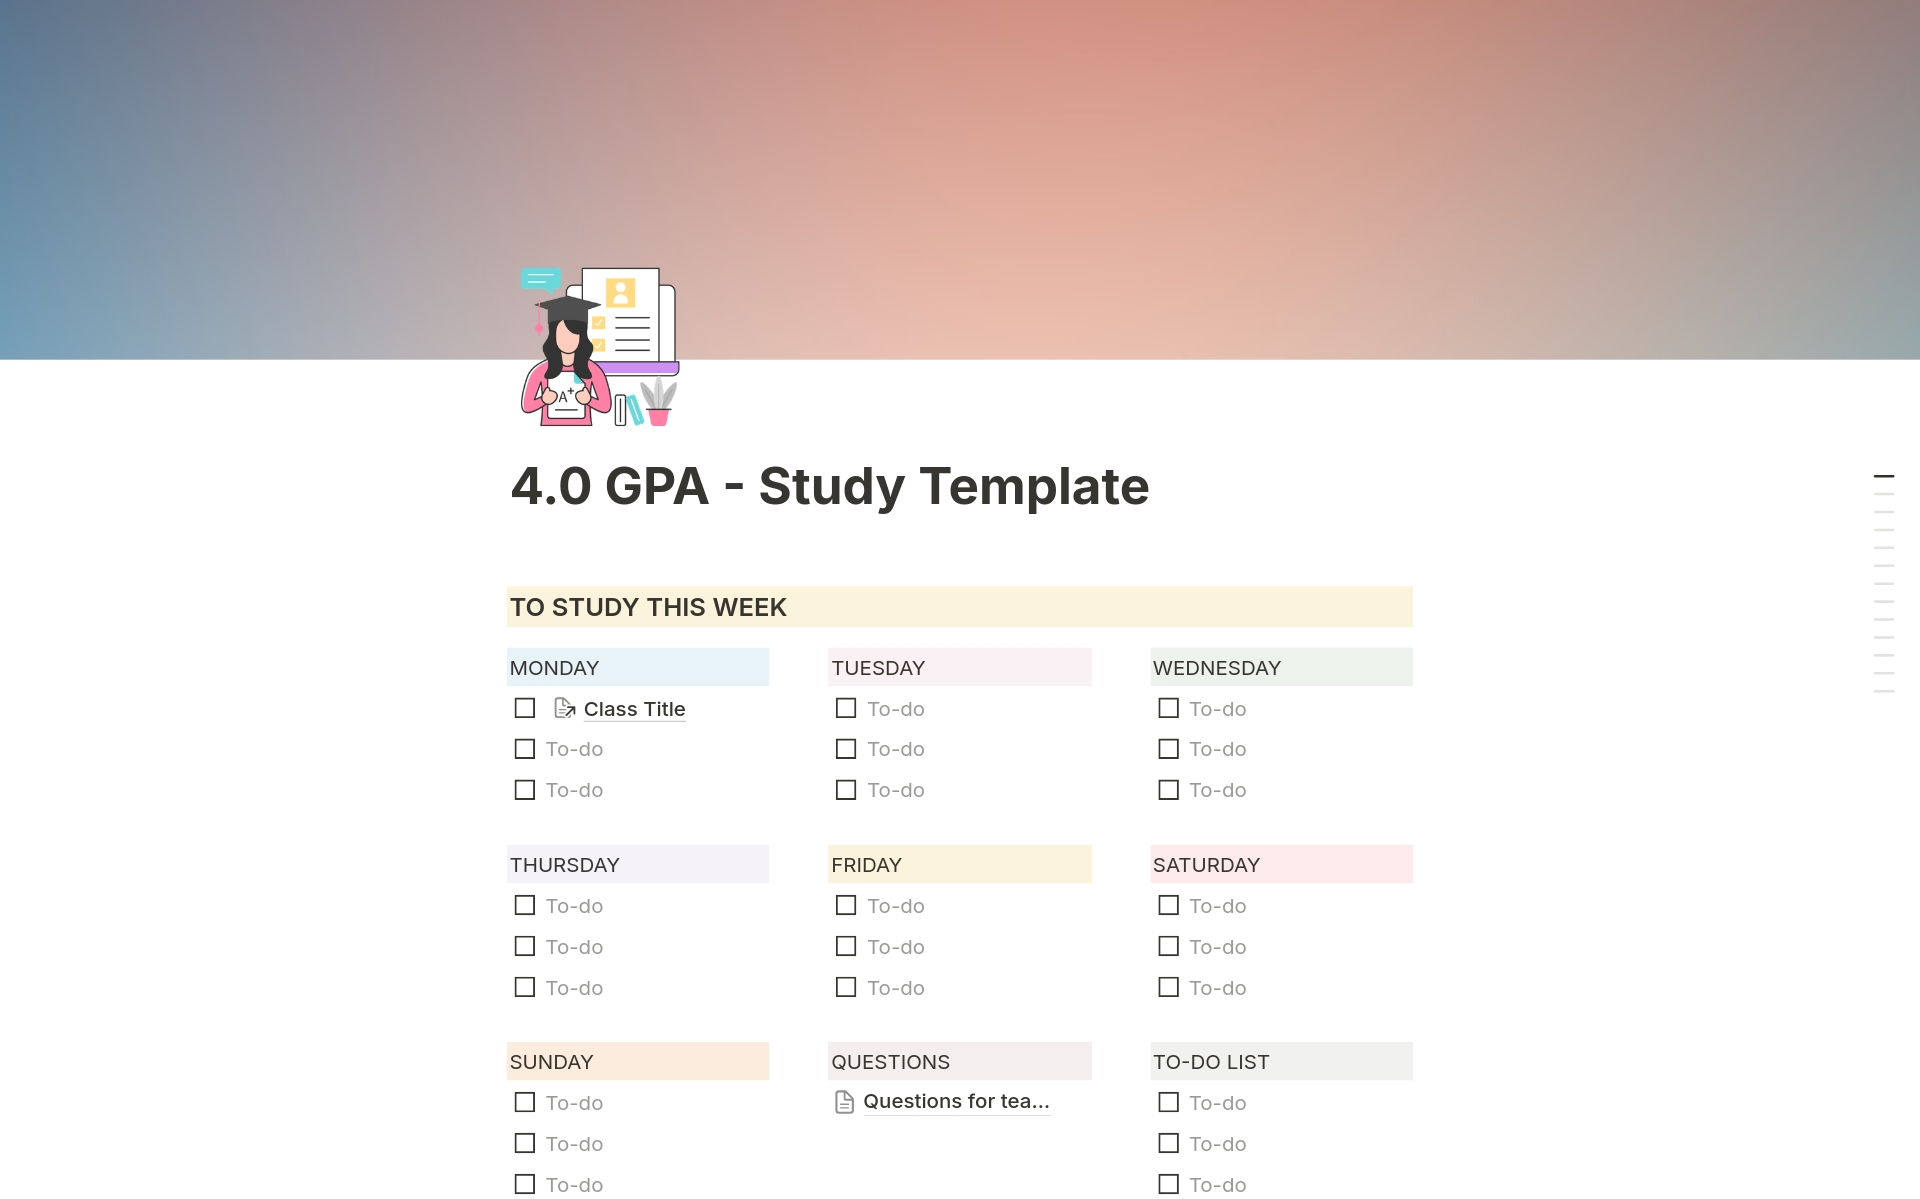 Hi there! I'm Brigid, and I've maintained a 4.0 GPA in my university degree using only this notion study template. No handwritten notes required! Also included is a video sharing how this template works to help you study smarter, not harder, and achieve academic success.  